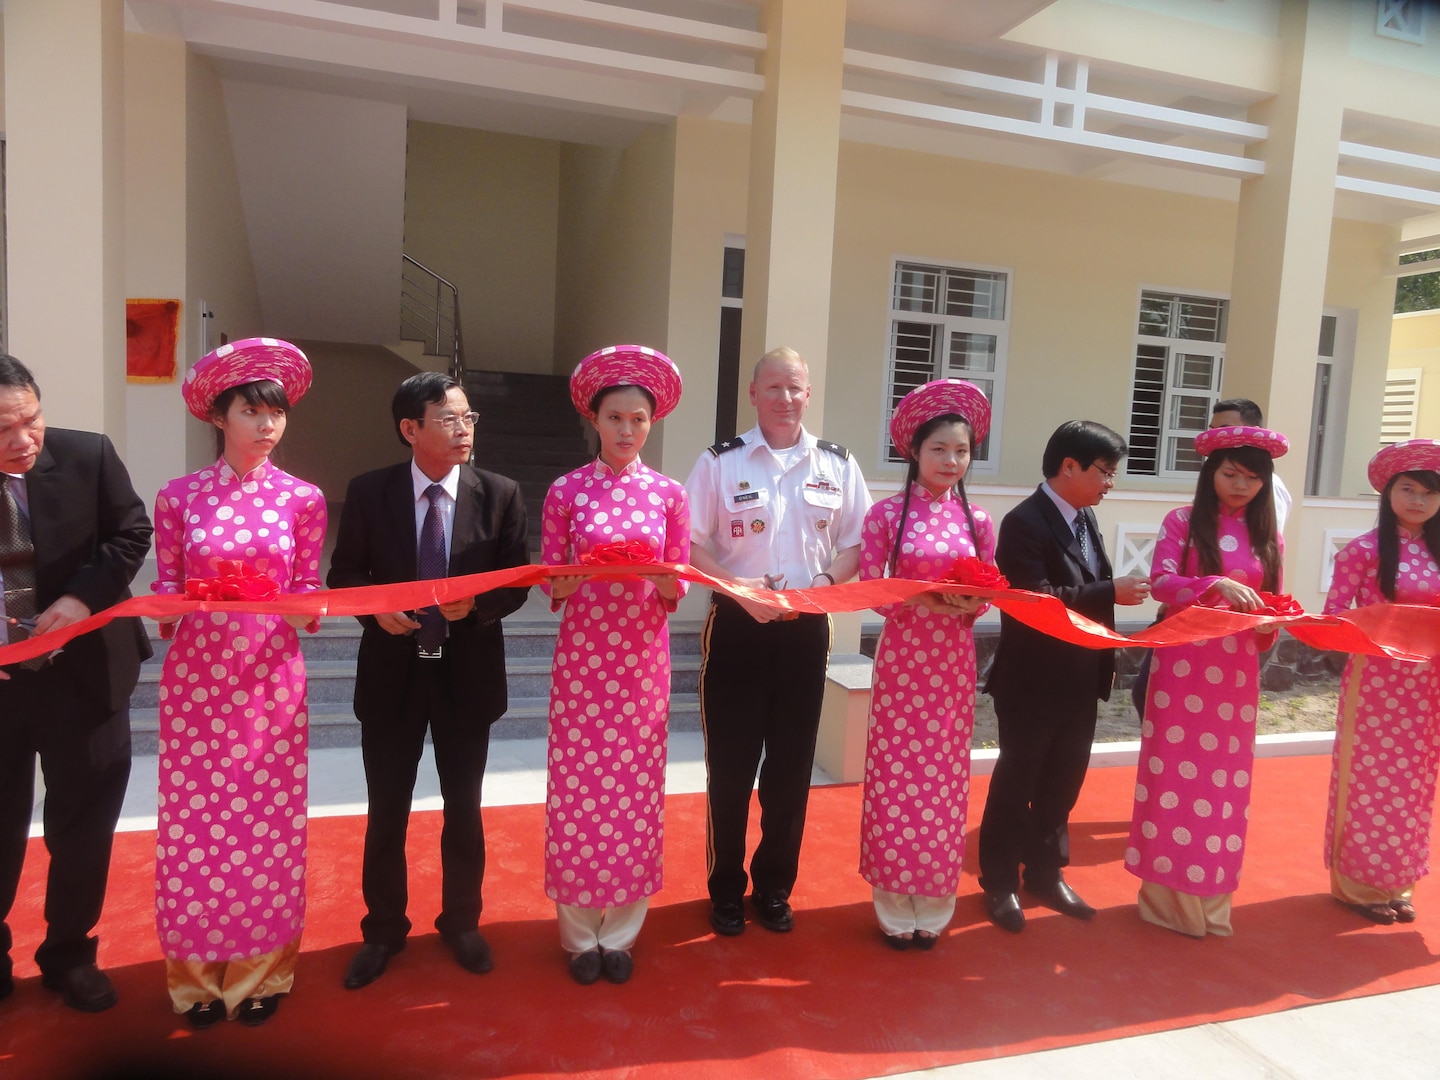 In this file photo, Quang Nam DMCC Ribbon cutting ceremony presented by Brig. Gen. John O’Neil, USPACOM J4 (center) and Mr. Nguyen Chin, Vice Chairman of Quang Nam Provincial People’s Committee (left) 